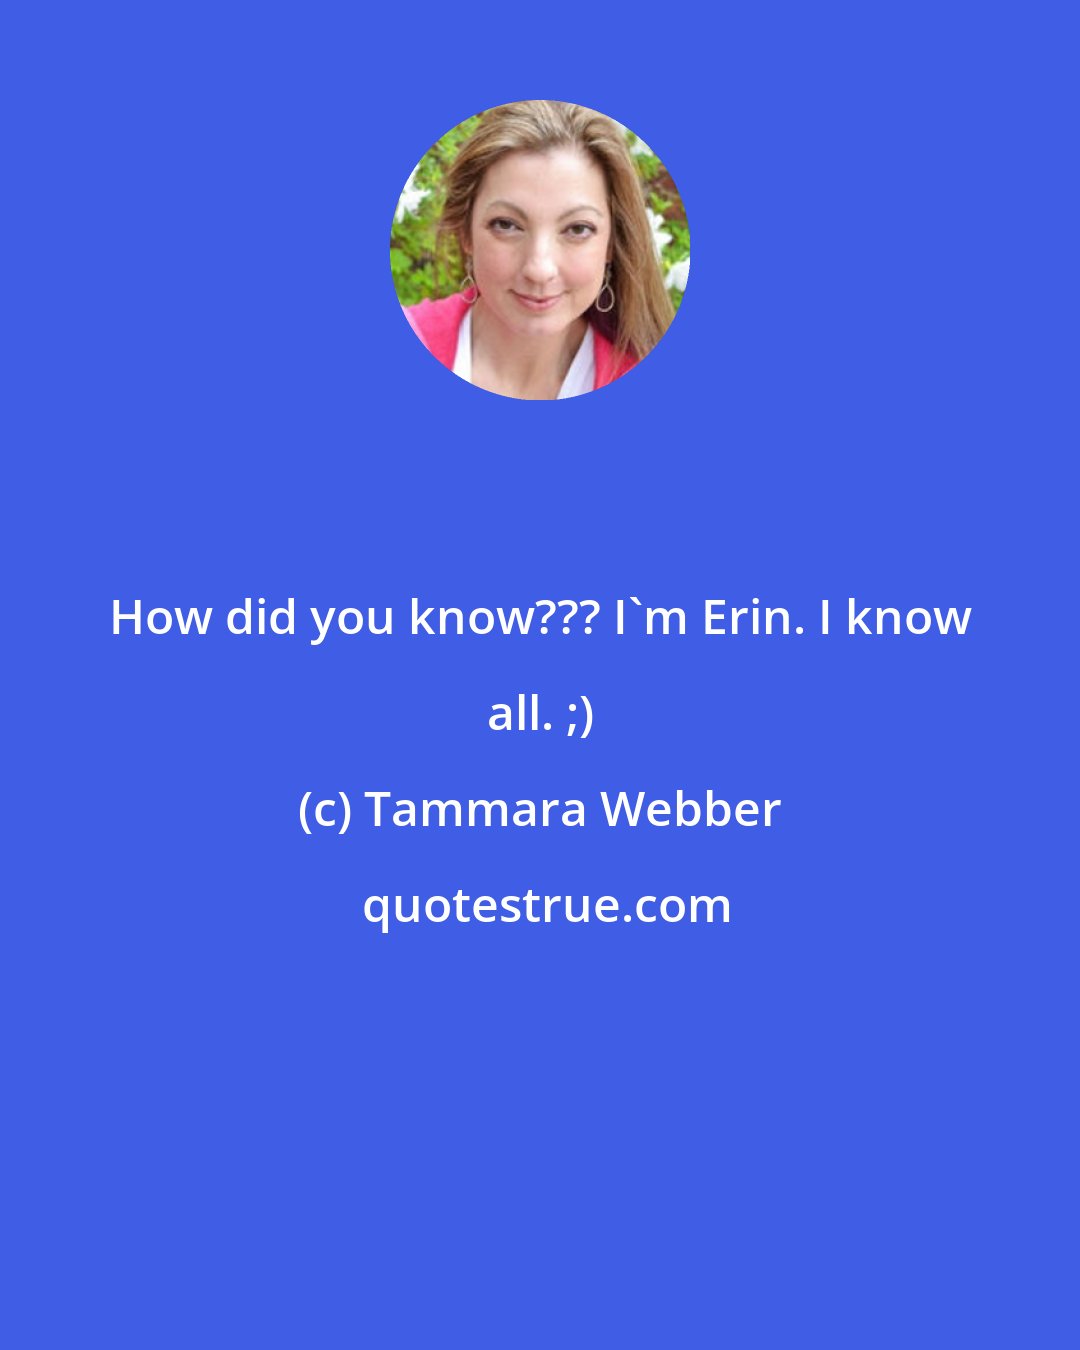 Tammara Webber: How did you know??? I'm Erin. I know all. ;)